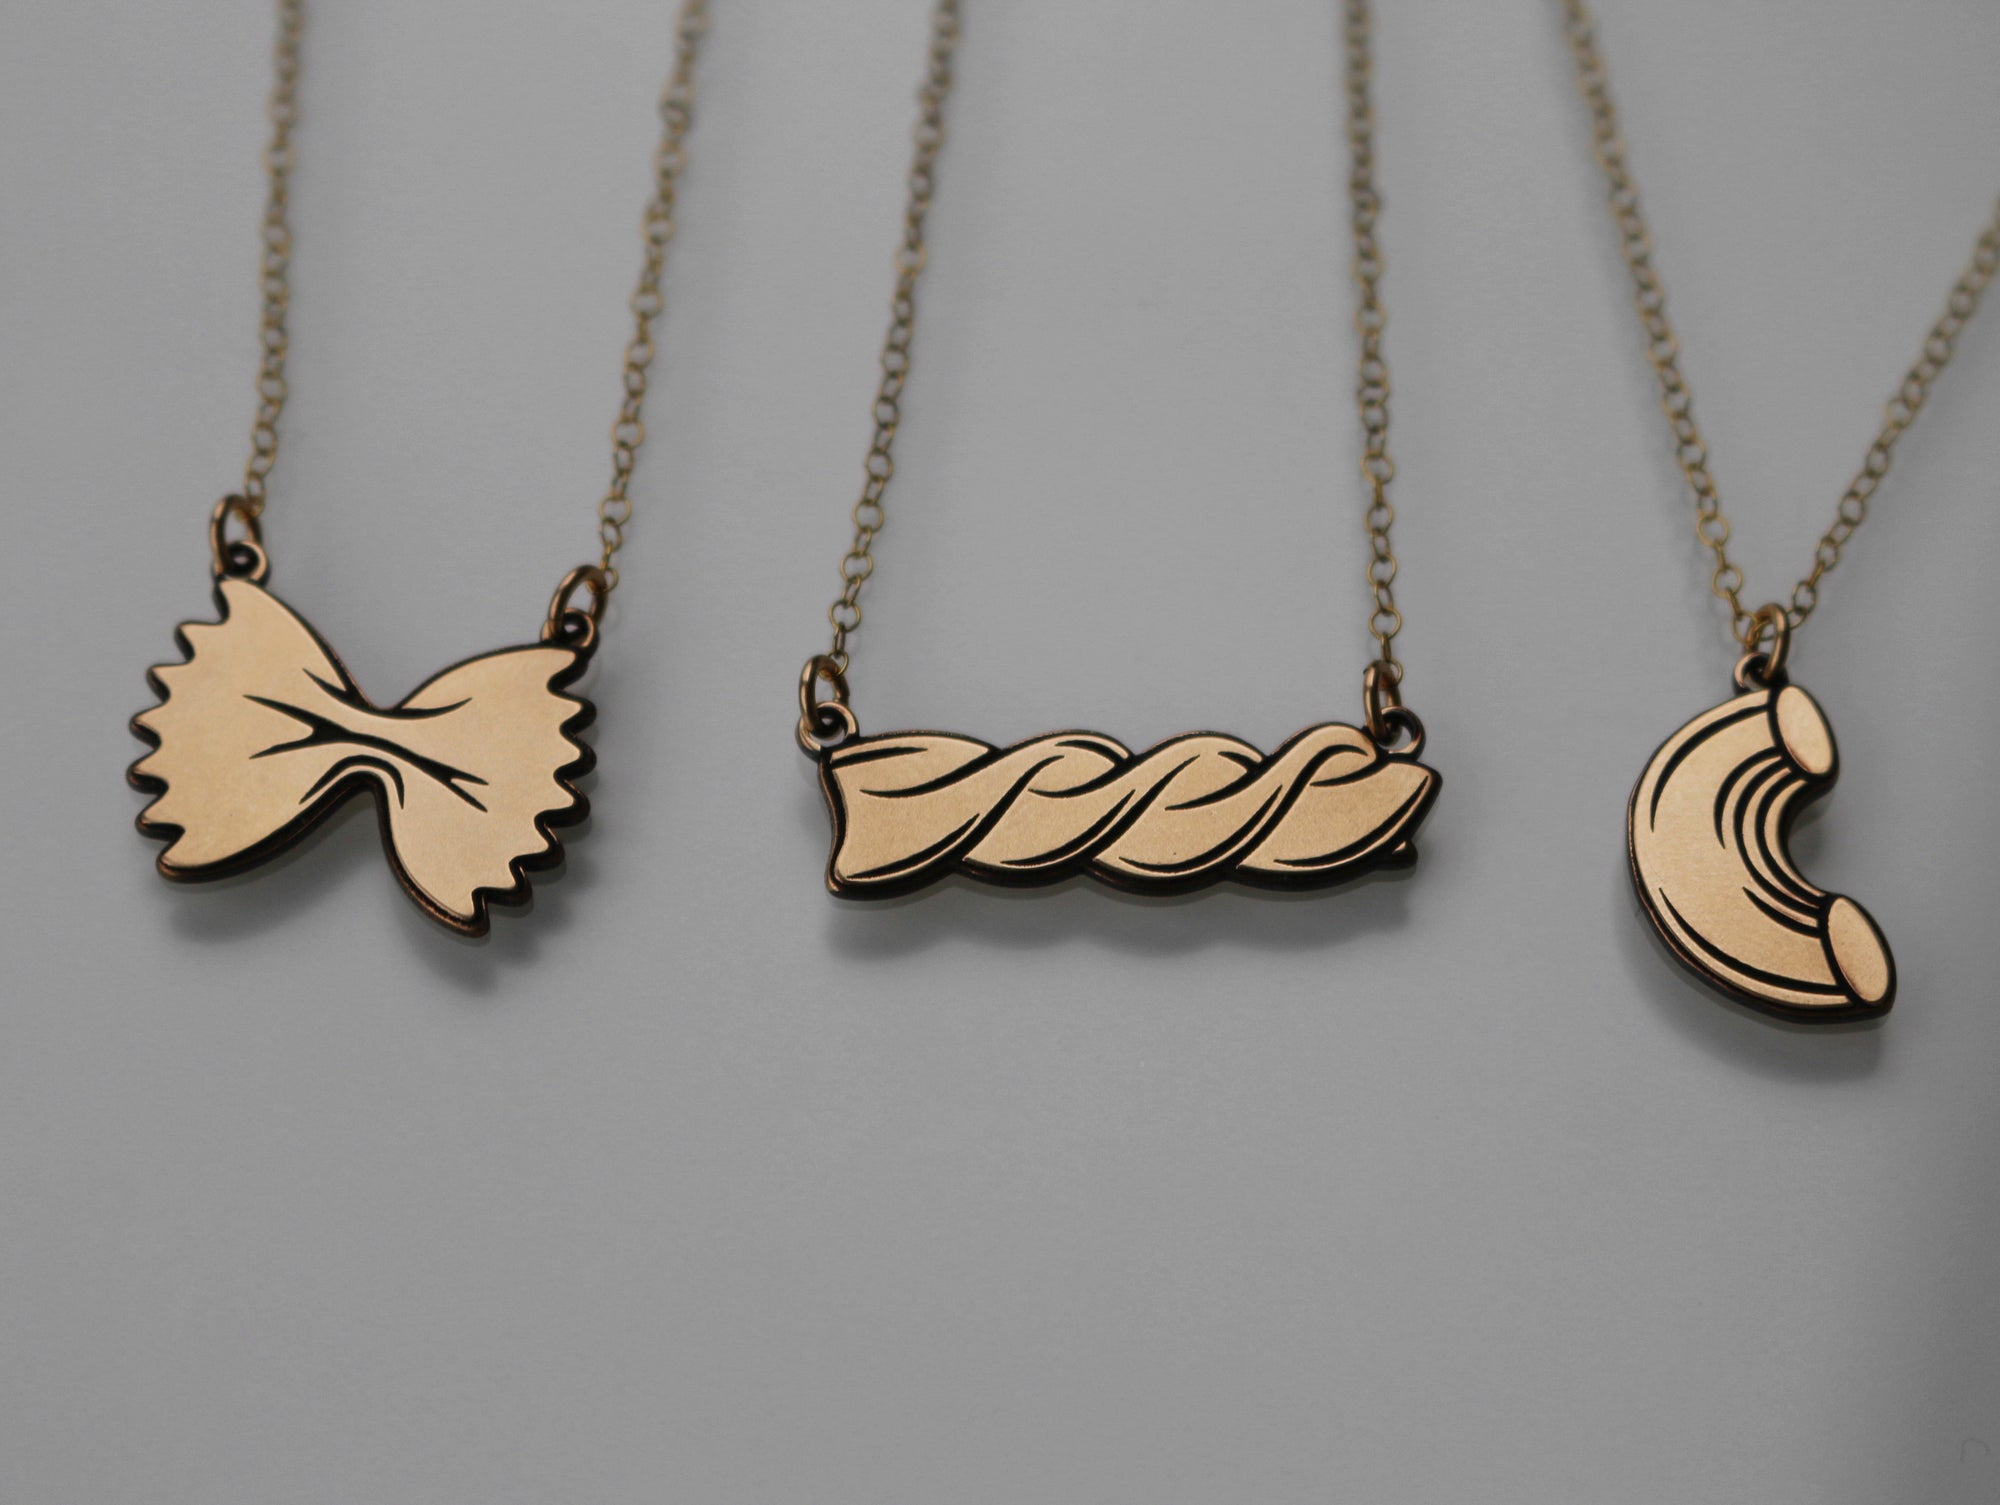 Rigatoni Pasta Necklace - Gold Filled